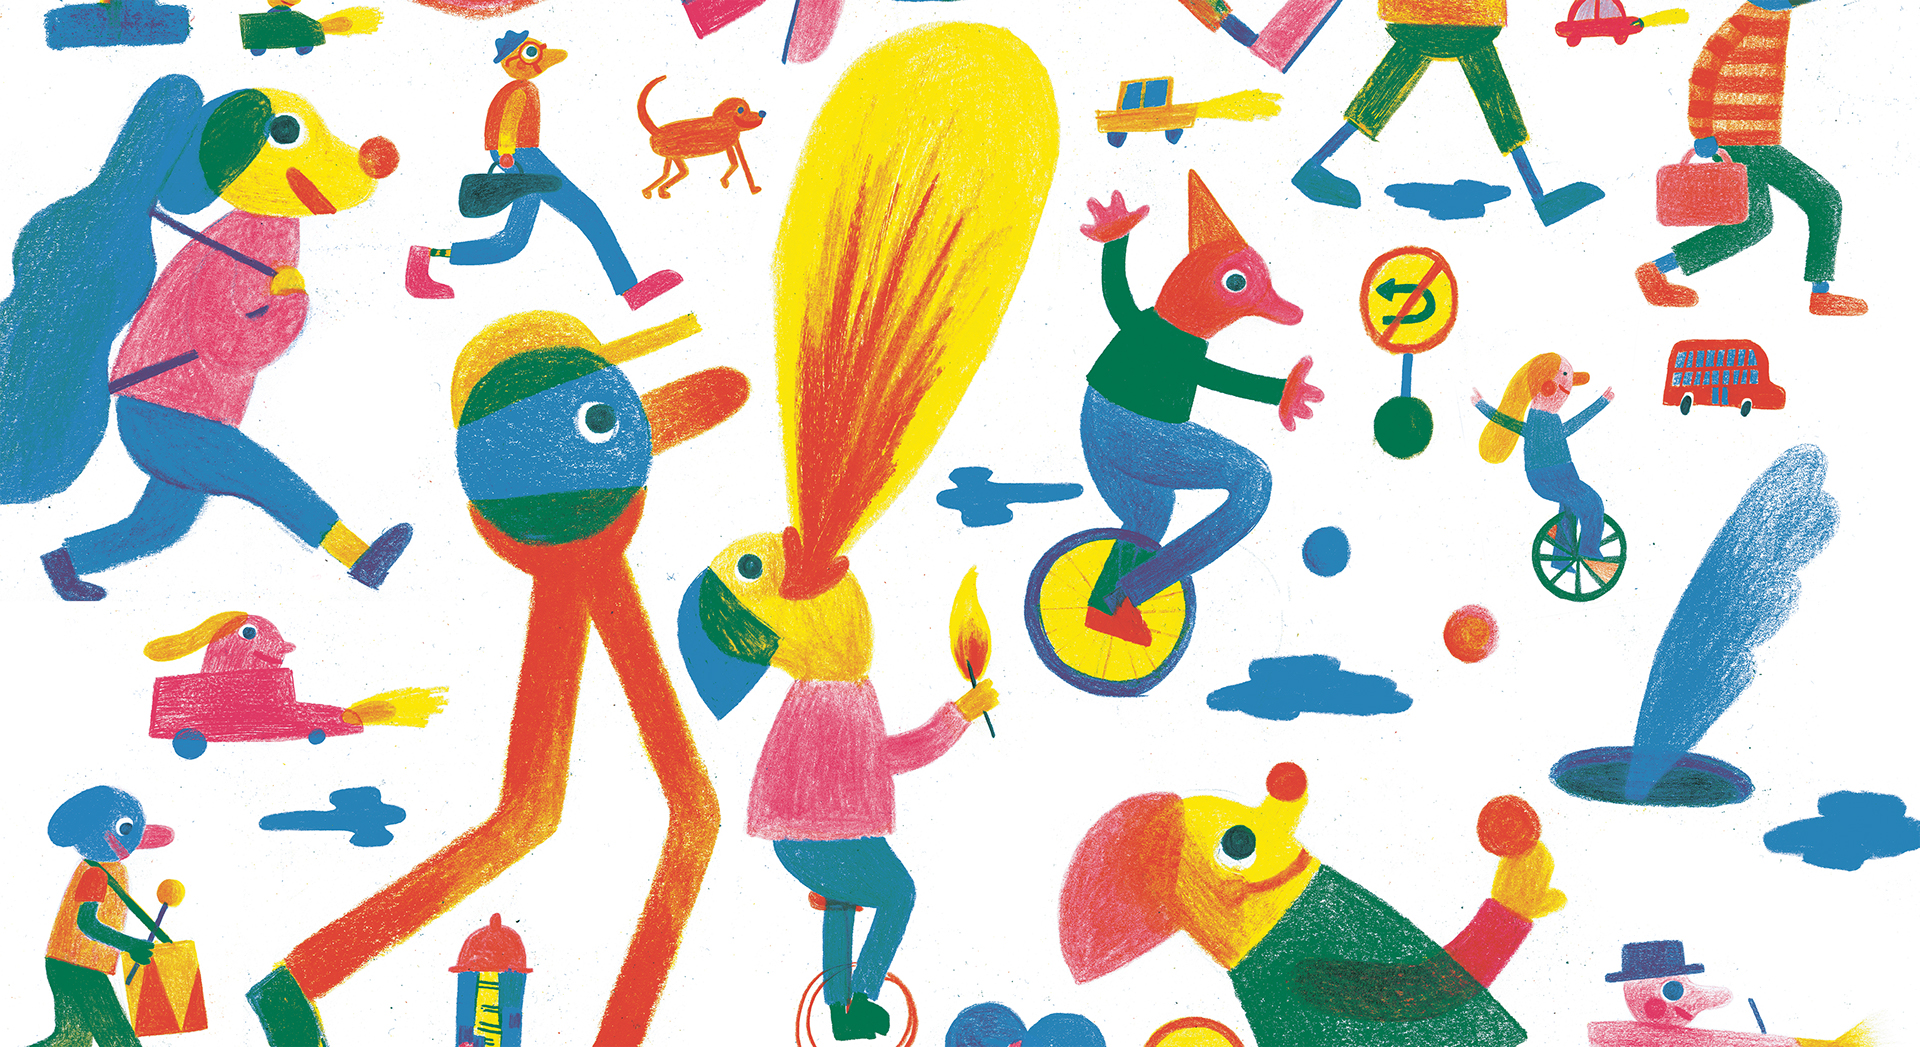 A whimsical illustration with colorful, animated figures and objects.